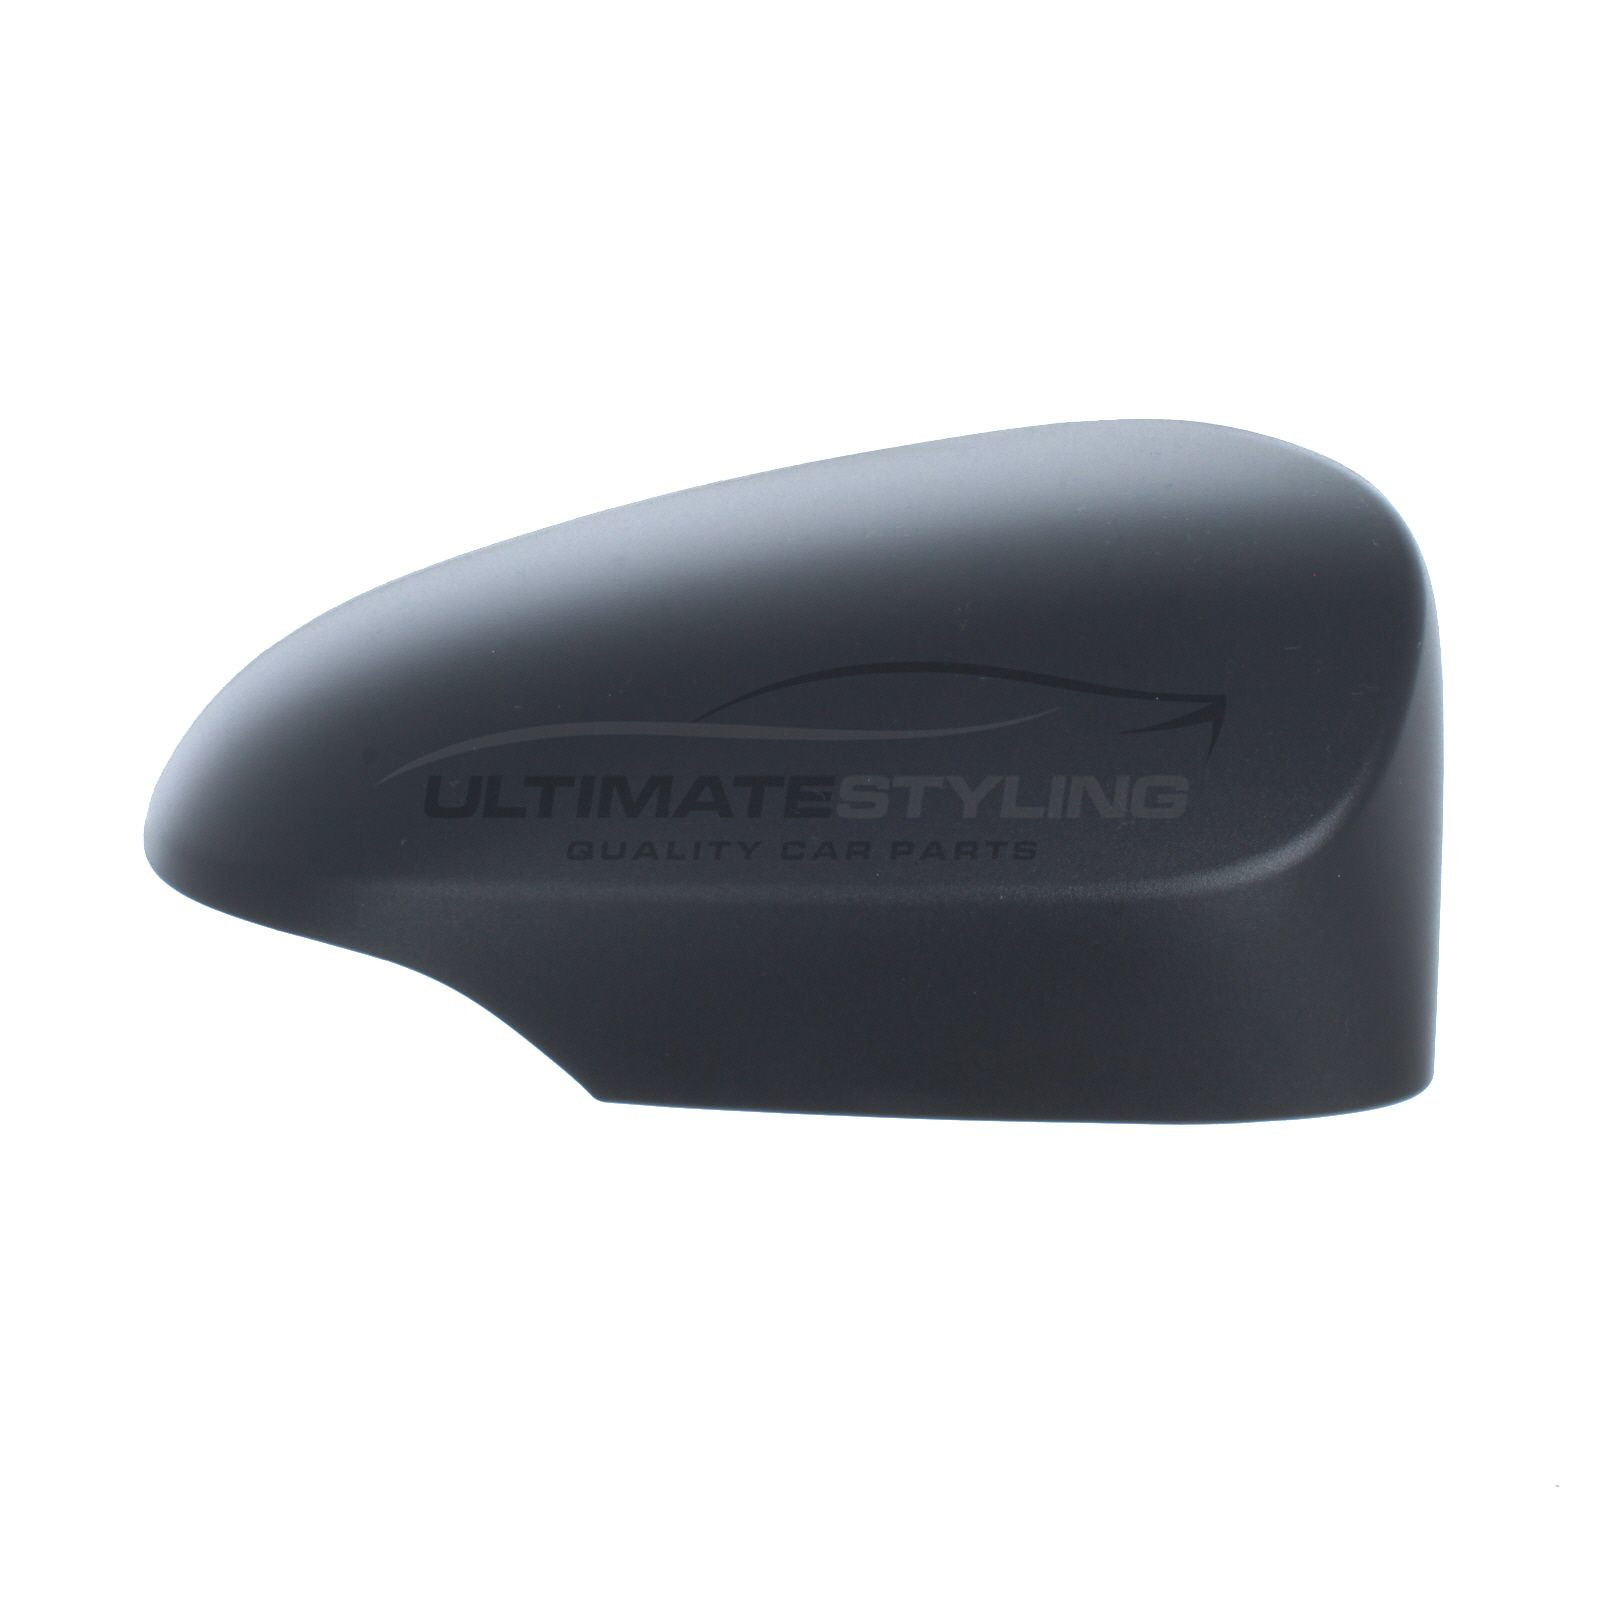 Toyota Yaris 2011-2021 Wing Mirror Cover Cap Casing Black (Textured) Drivers Side (RH)